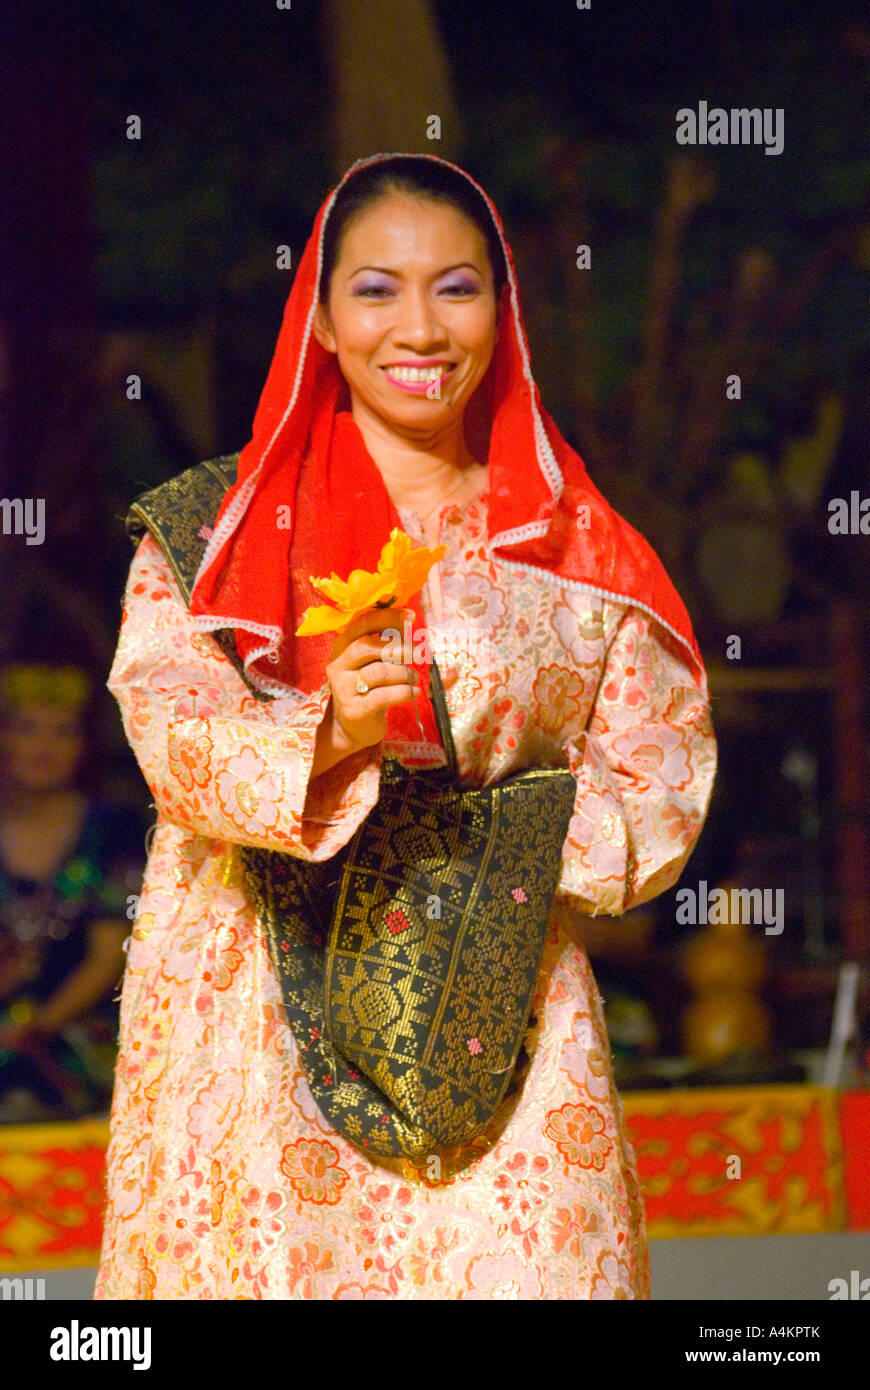 A dancer at the Sarawak Cultural Centre wearing traditional Malay Muslim dress Stock Photo